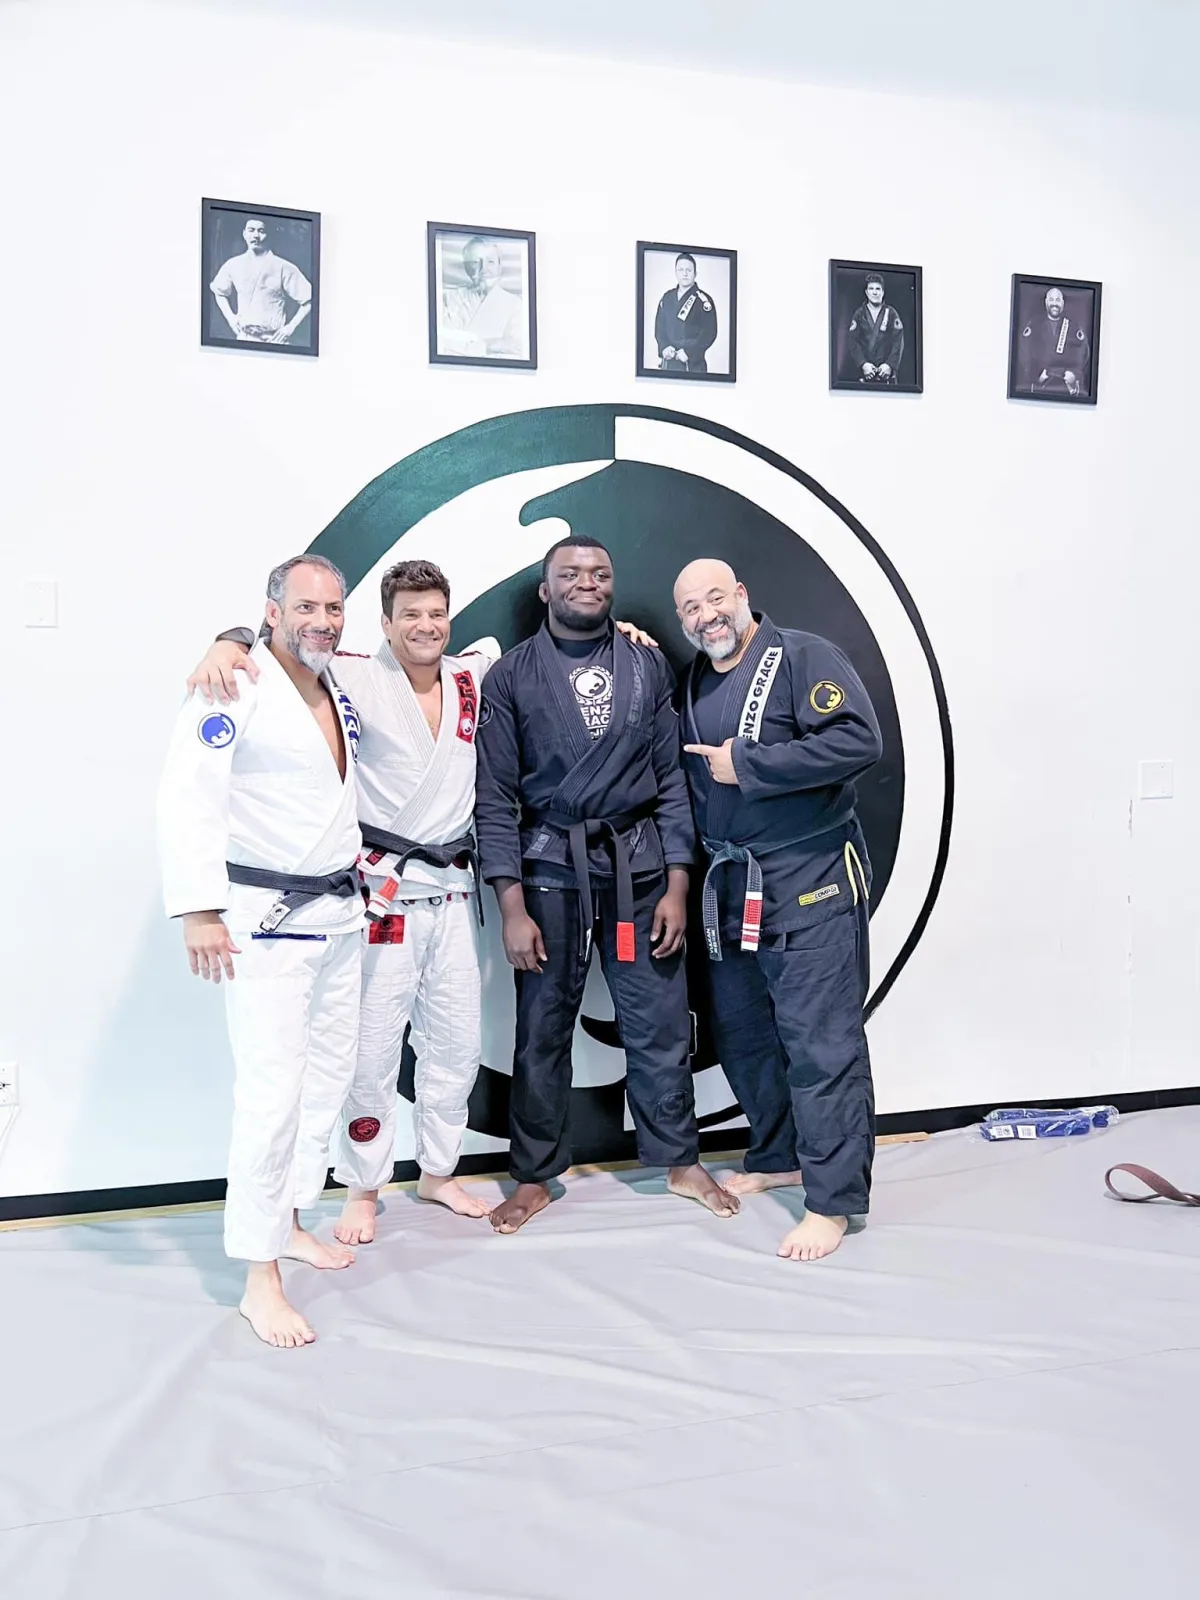 two of the instructors at the Renzo Gracie Academy of Lake Worth, along with a guest instructor named Stan Beck. The three men are standing in front of the Renzo Gracie of Lake Worth logo, which is displayed on a wall behind them. The instructors are wearing traditional jiu-jitsu uniforms (gi) and black belts, and they are smiling for the camera. The gym has a spacious and well-lit training area, with mats covering the floor and motivational posters and banners on the walls. The image represents the sense of community and dedication to excellence in jiu-jitsu training that the Renzo Gracie Academy embodies.